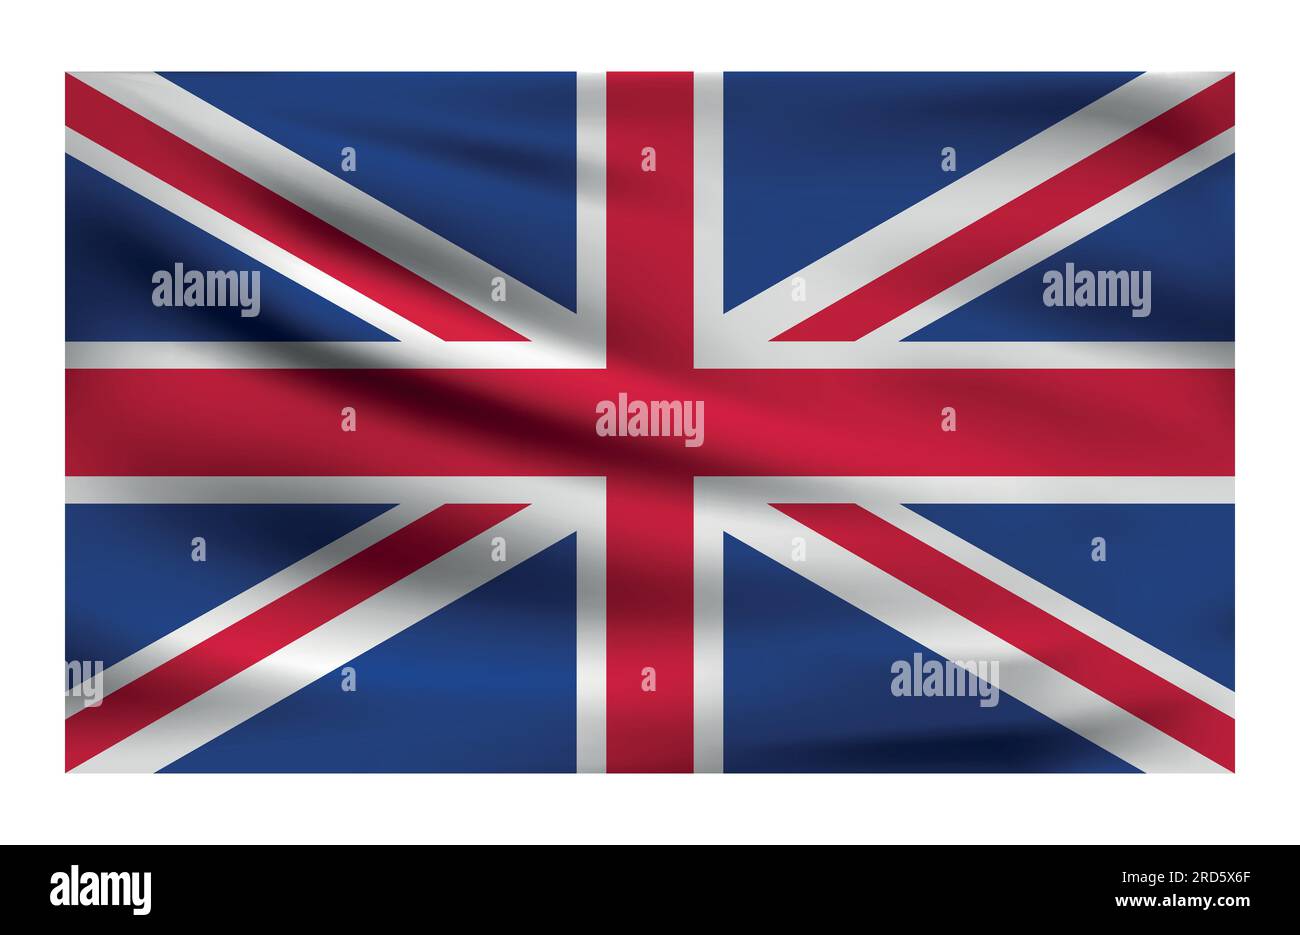 I see so many posts of the Union Jack without one of the countries